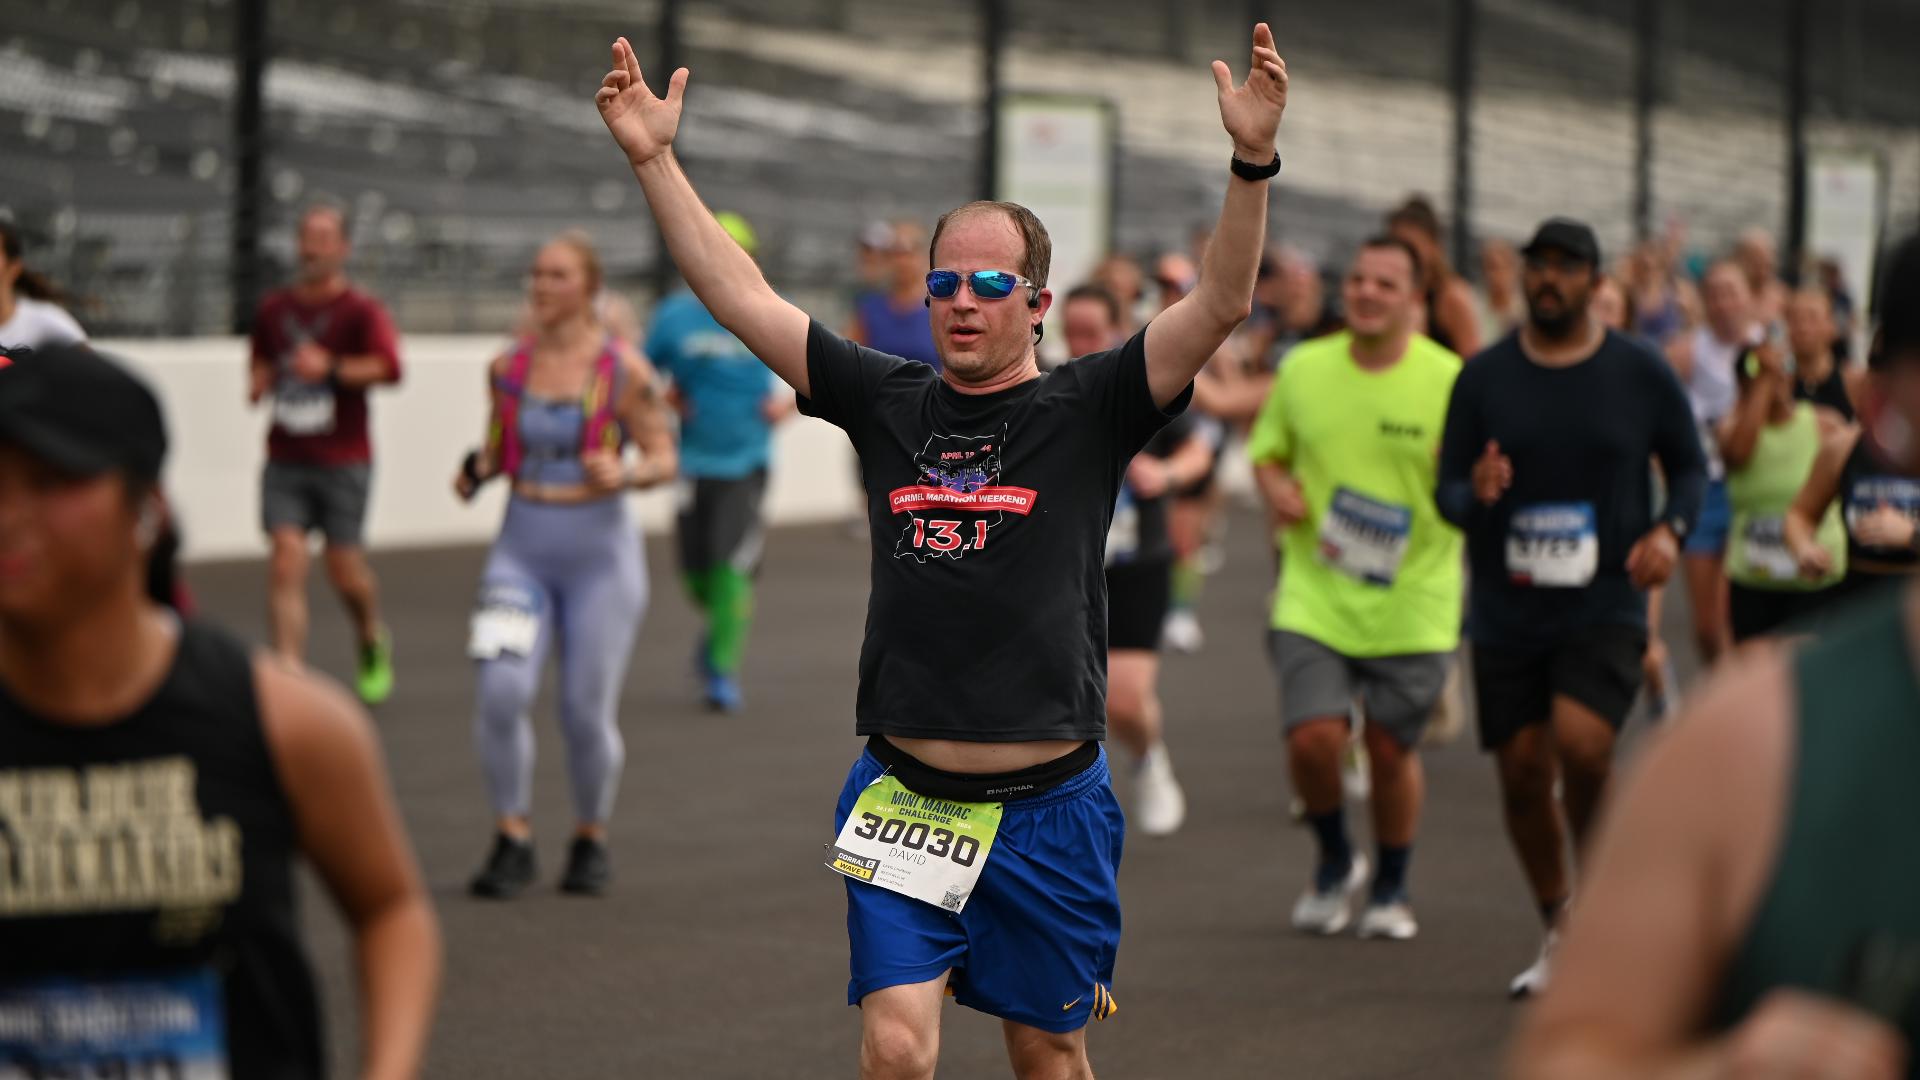 Participants can now sign up for the Indianapolis 500 Mile and Gasoline Alley 250 Mile challenges, which promote keeping active beyond the month of May.